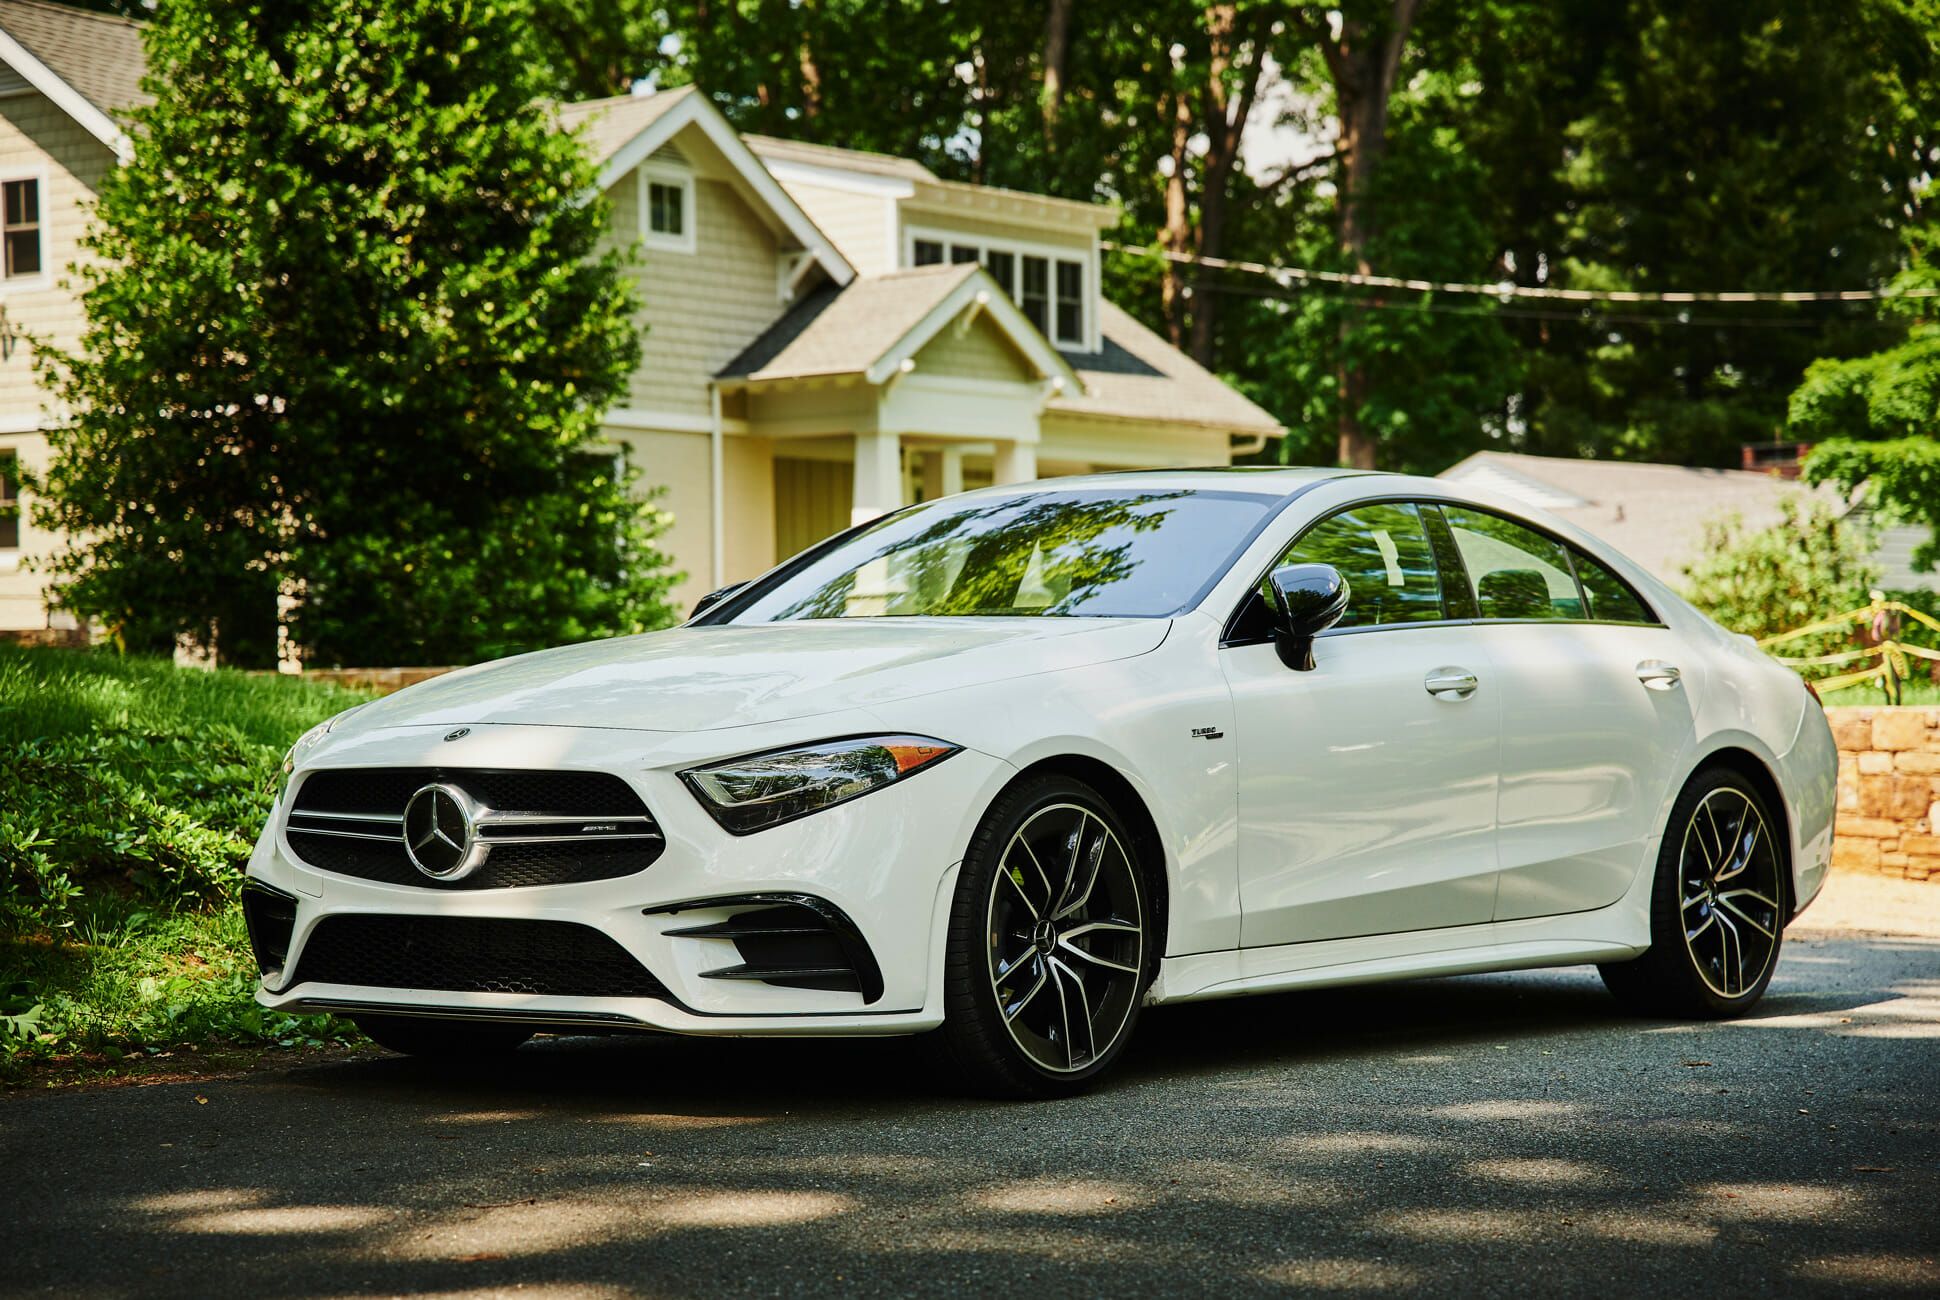 2019 Mercedes-AMG CLS53 Review: Here's How You Make a Jack-Of-All-Trades